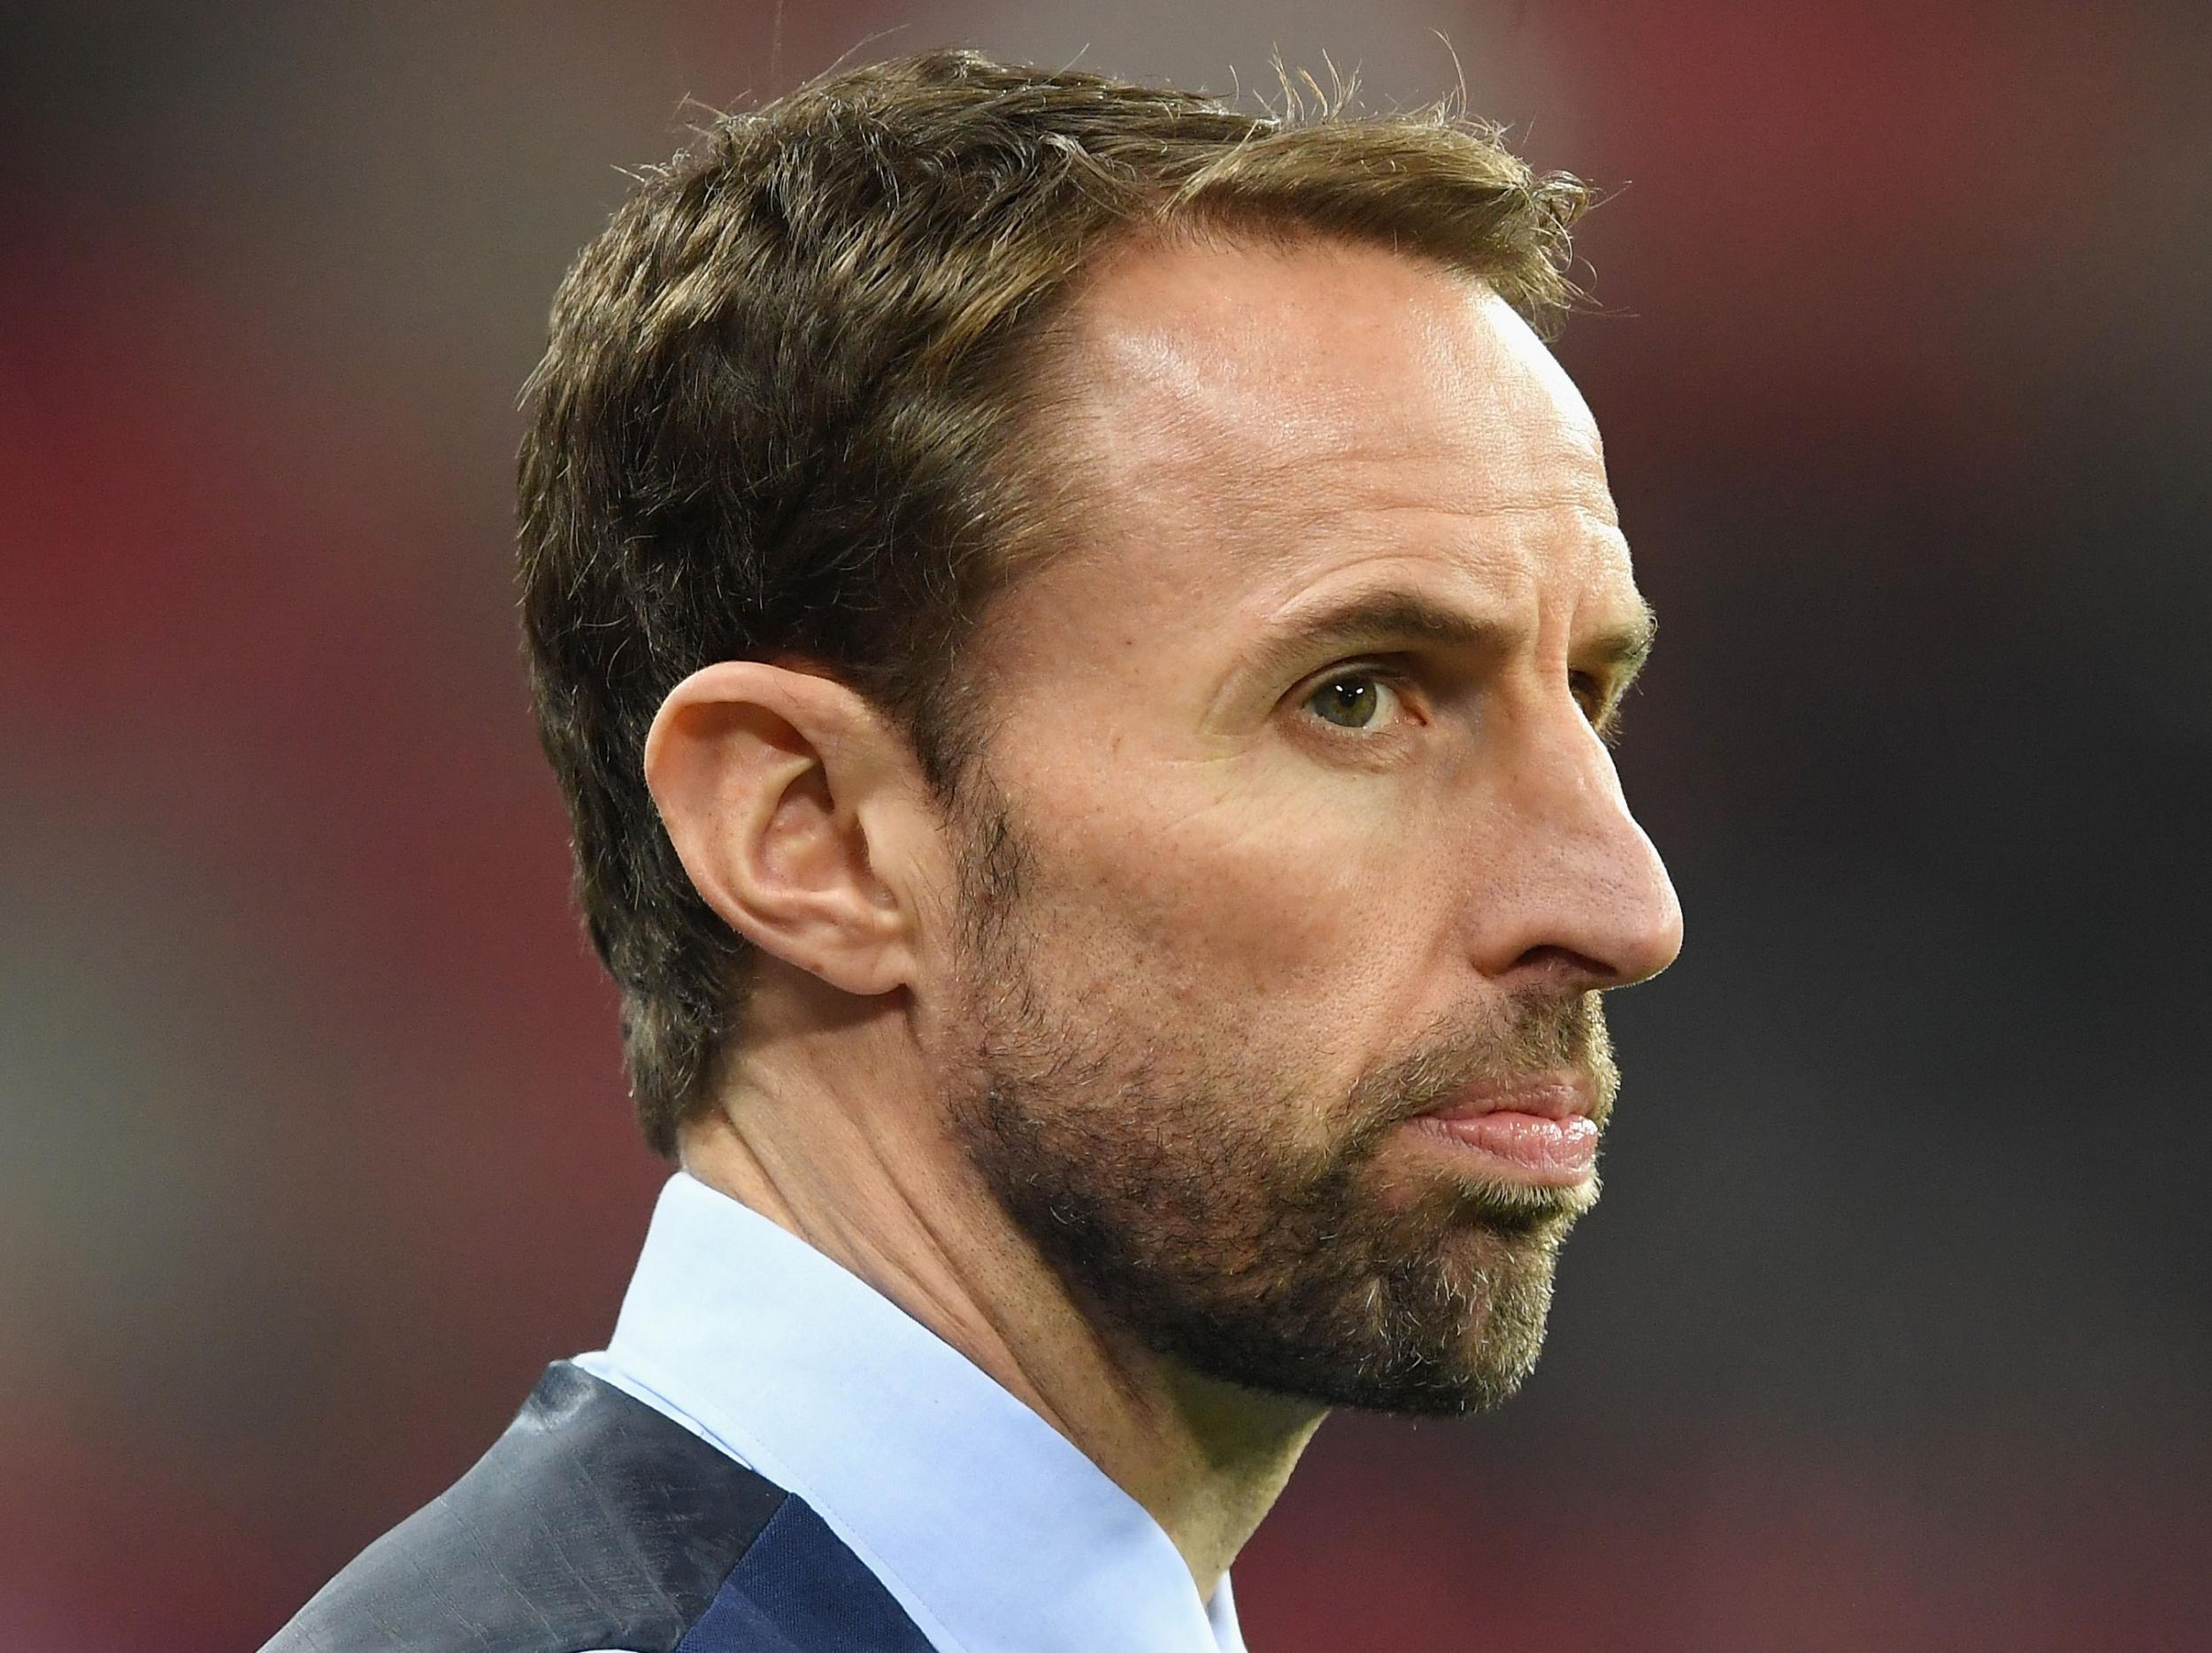 &#13;
Southgate is expected to incorporate England's emerging talent into the senior side &#13;